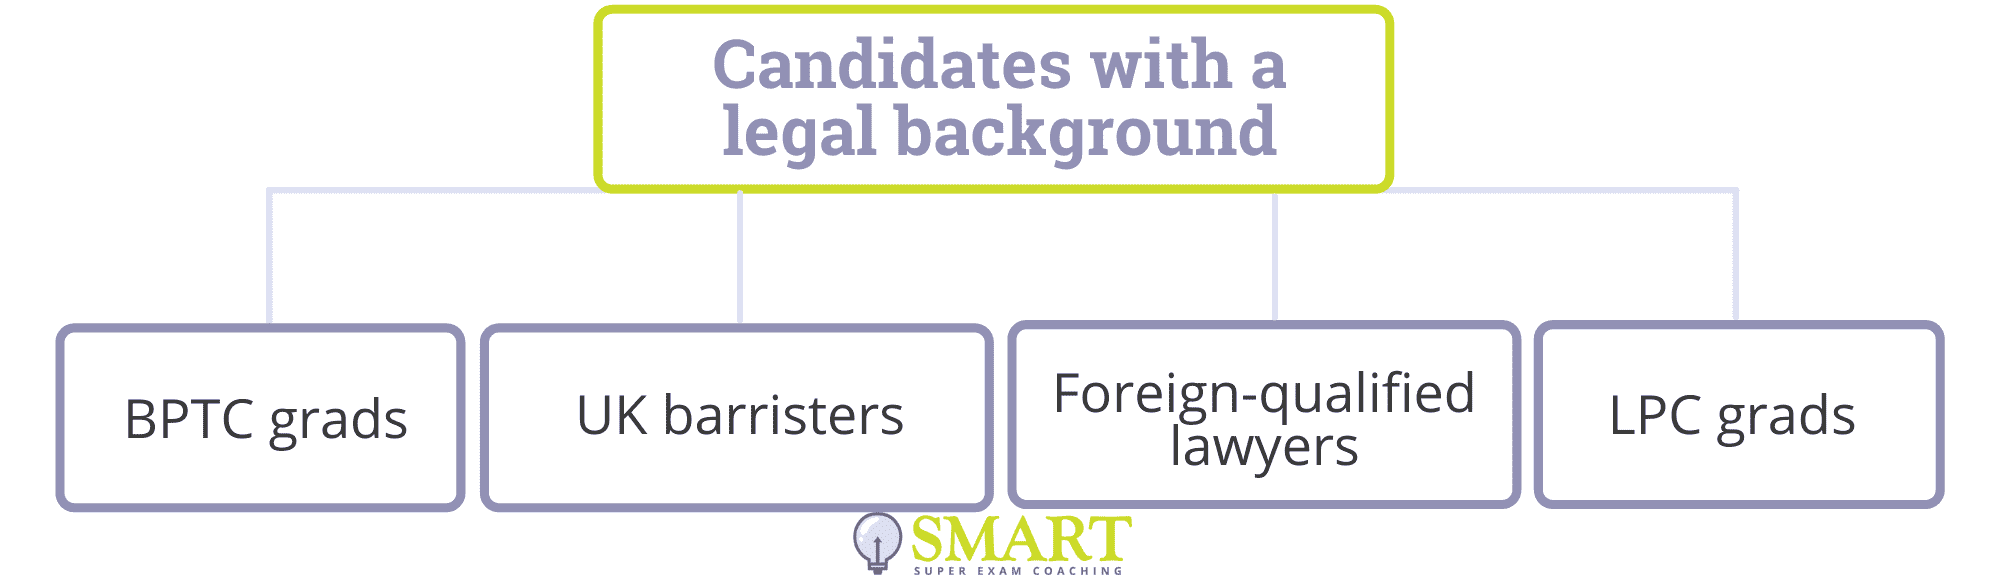 SQE for candidates with a legal background